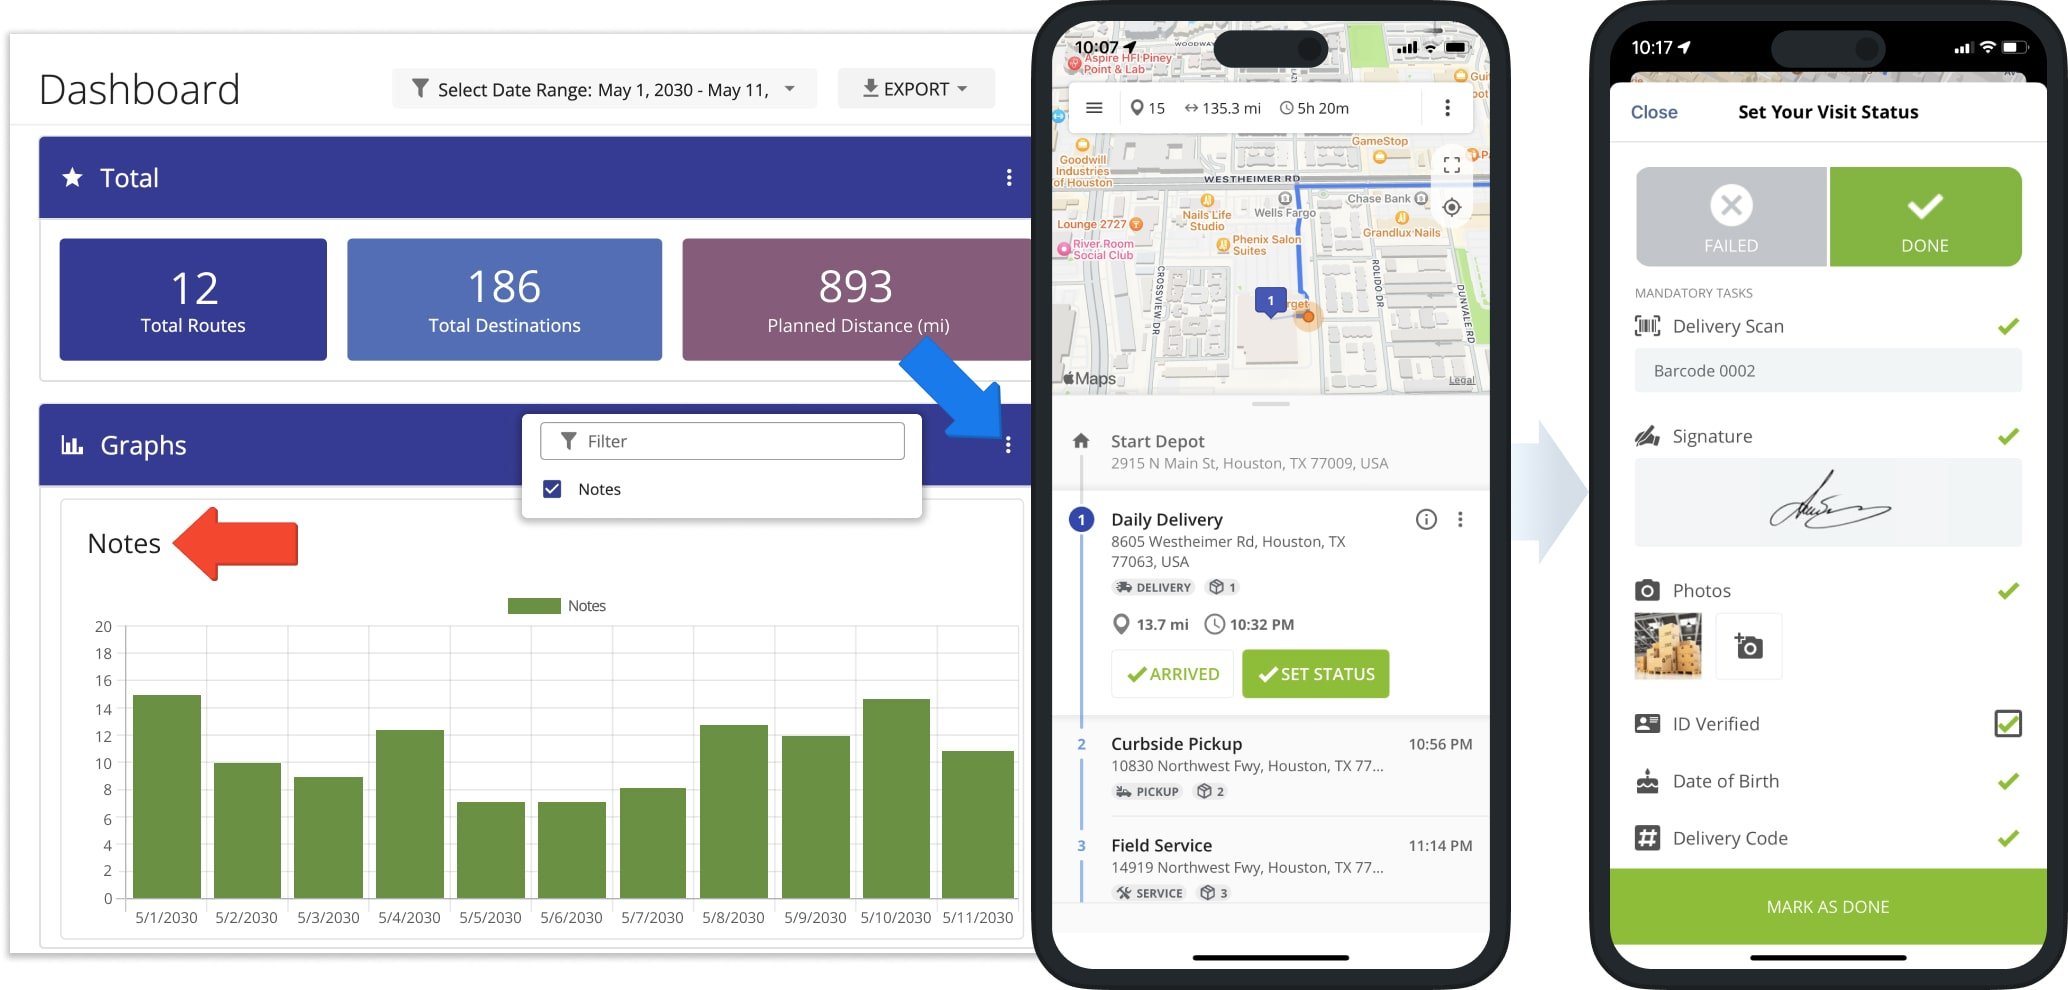 As your field employees visit destinations and execute routes, they can add Notes to route destinations. Your Dashboard enables you to view the number of Notes added to destinations.